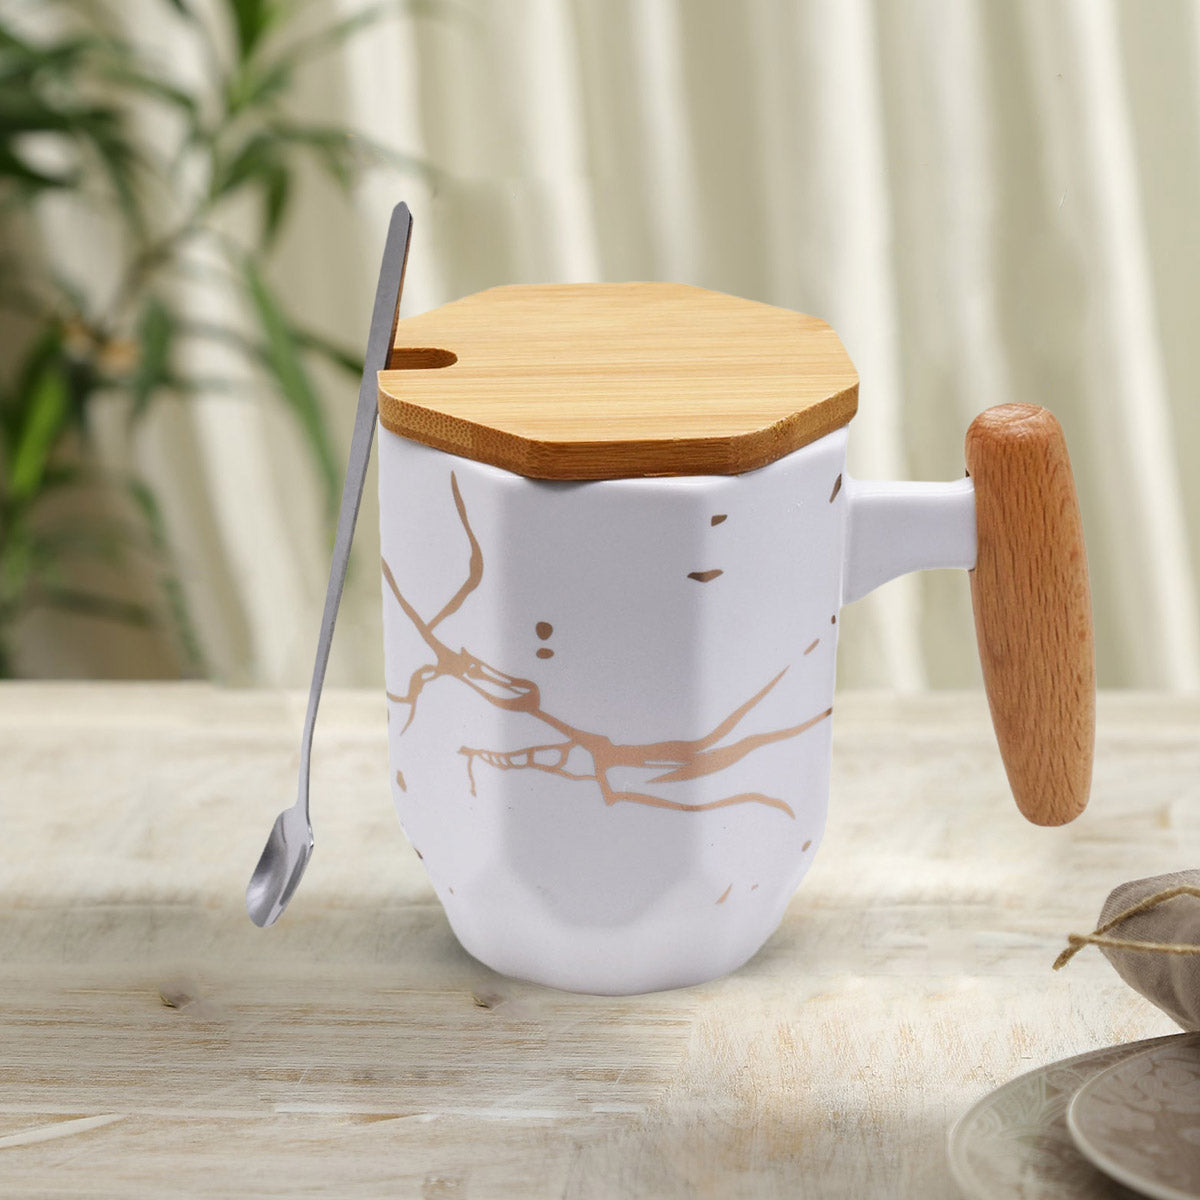 Fancy Ceramic Coffee or Tea Mug with Lid and Handle with Spoon (8544)